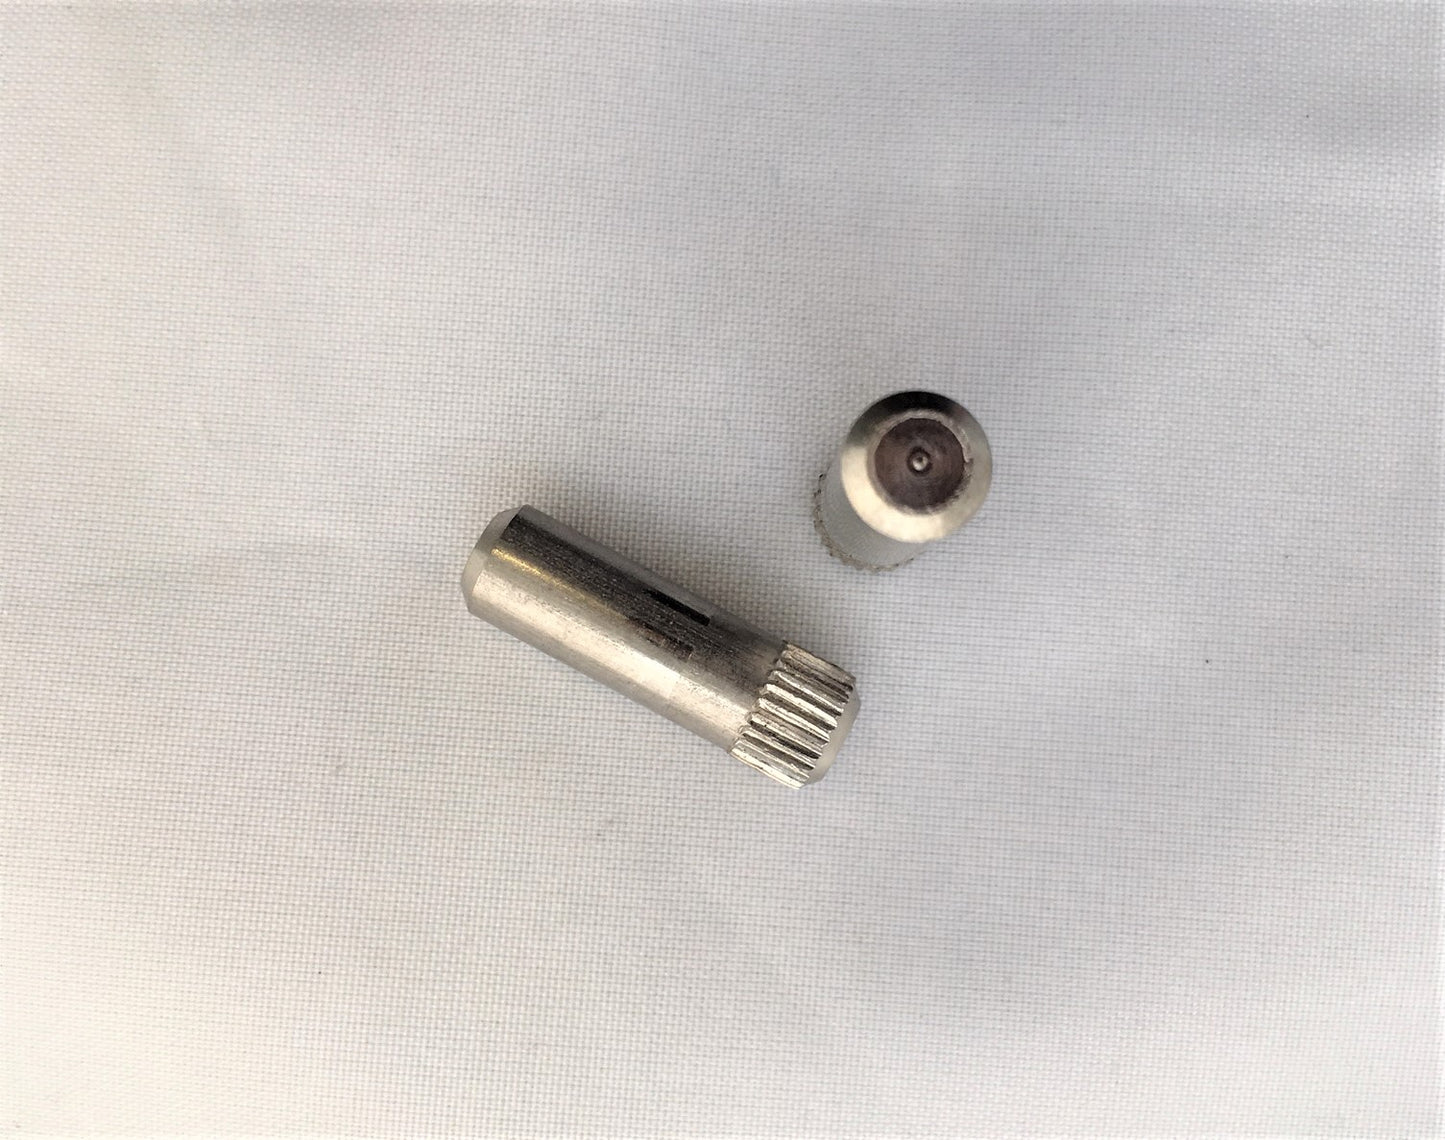 AXLE Pin ONLY - suits DR36 rollers and more - Sold singularly